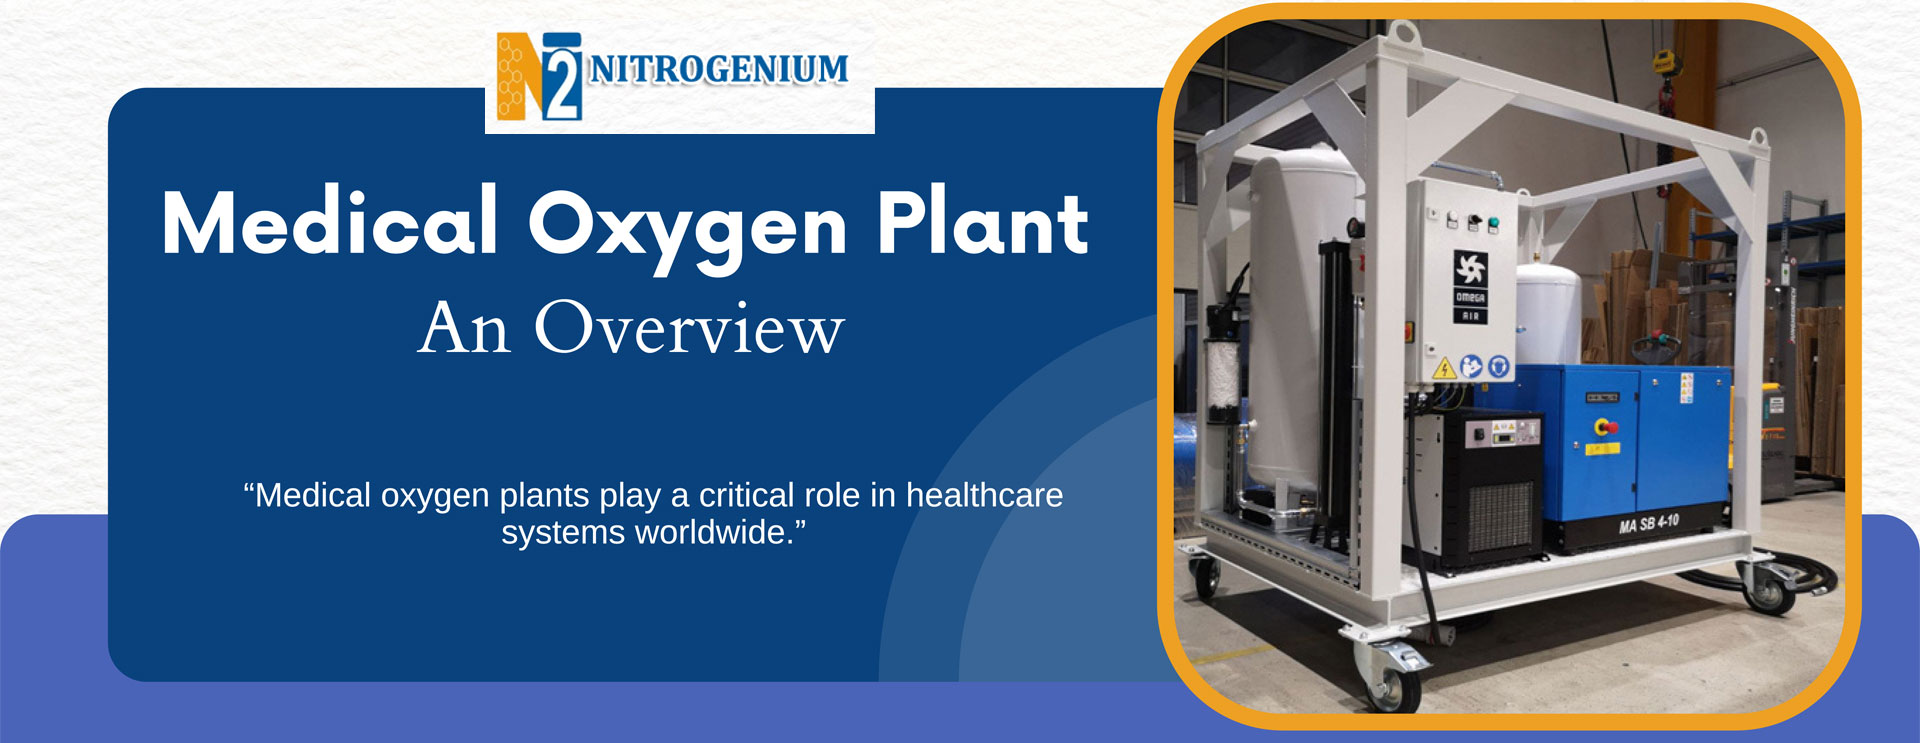 Medical Oxygen Plant - An Overview